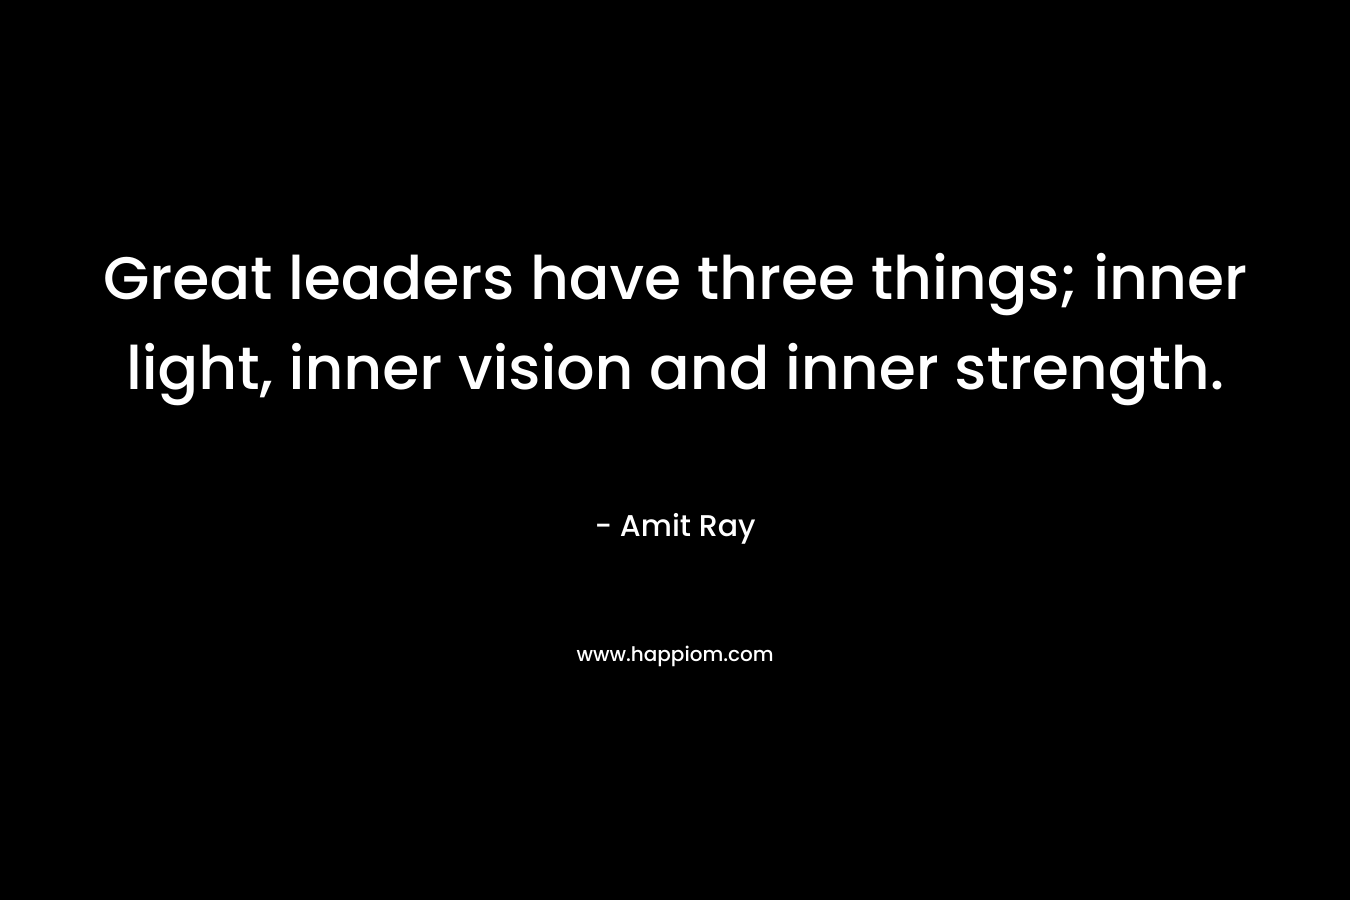 Great leaders have three things; inner light, inner vision and inner strength.